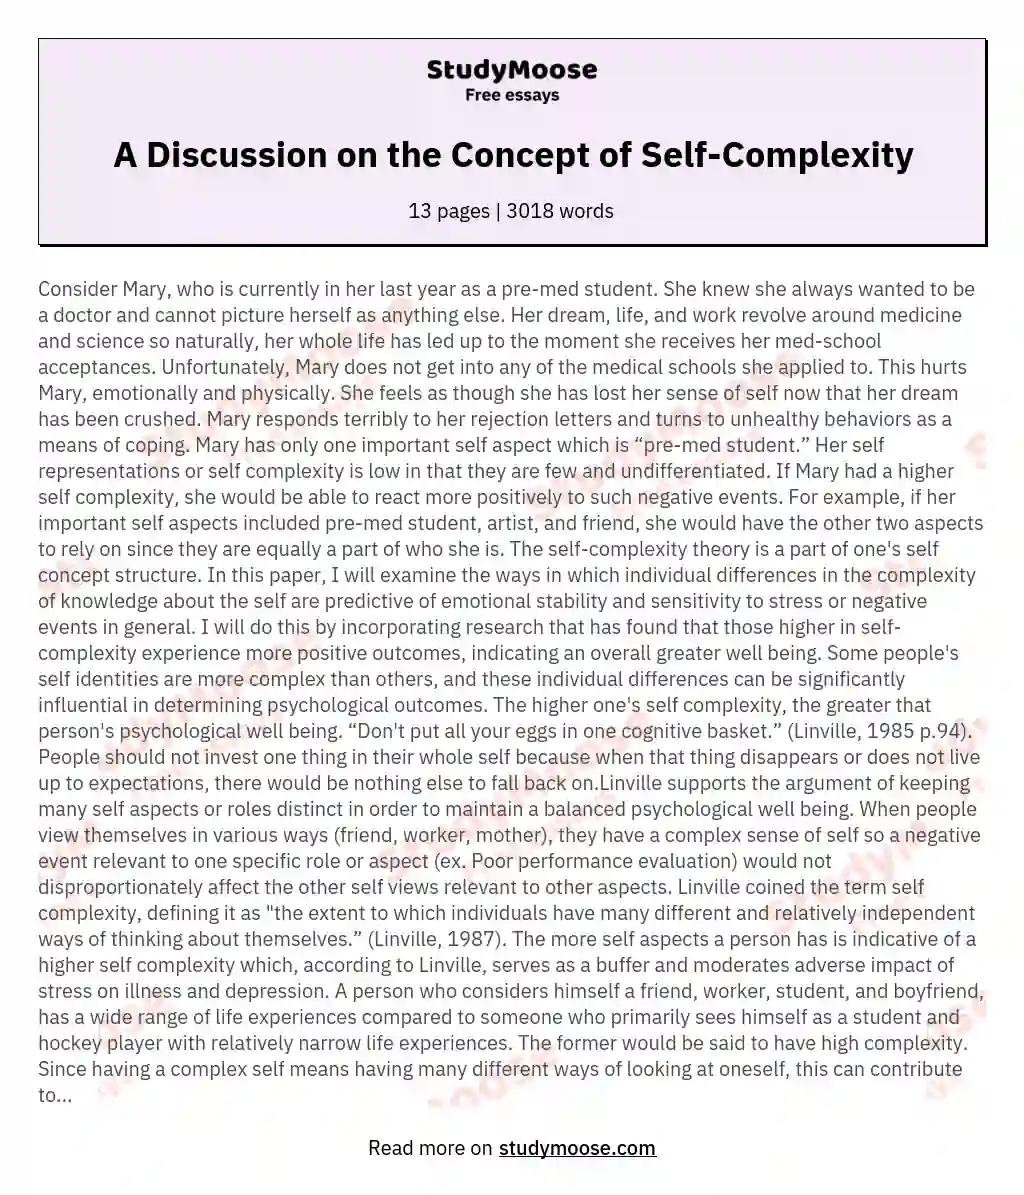 A Discussion on the Concept of Self-Complexity essay